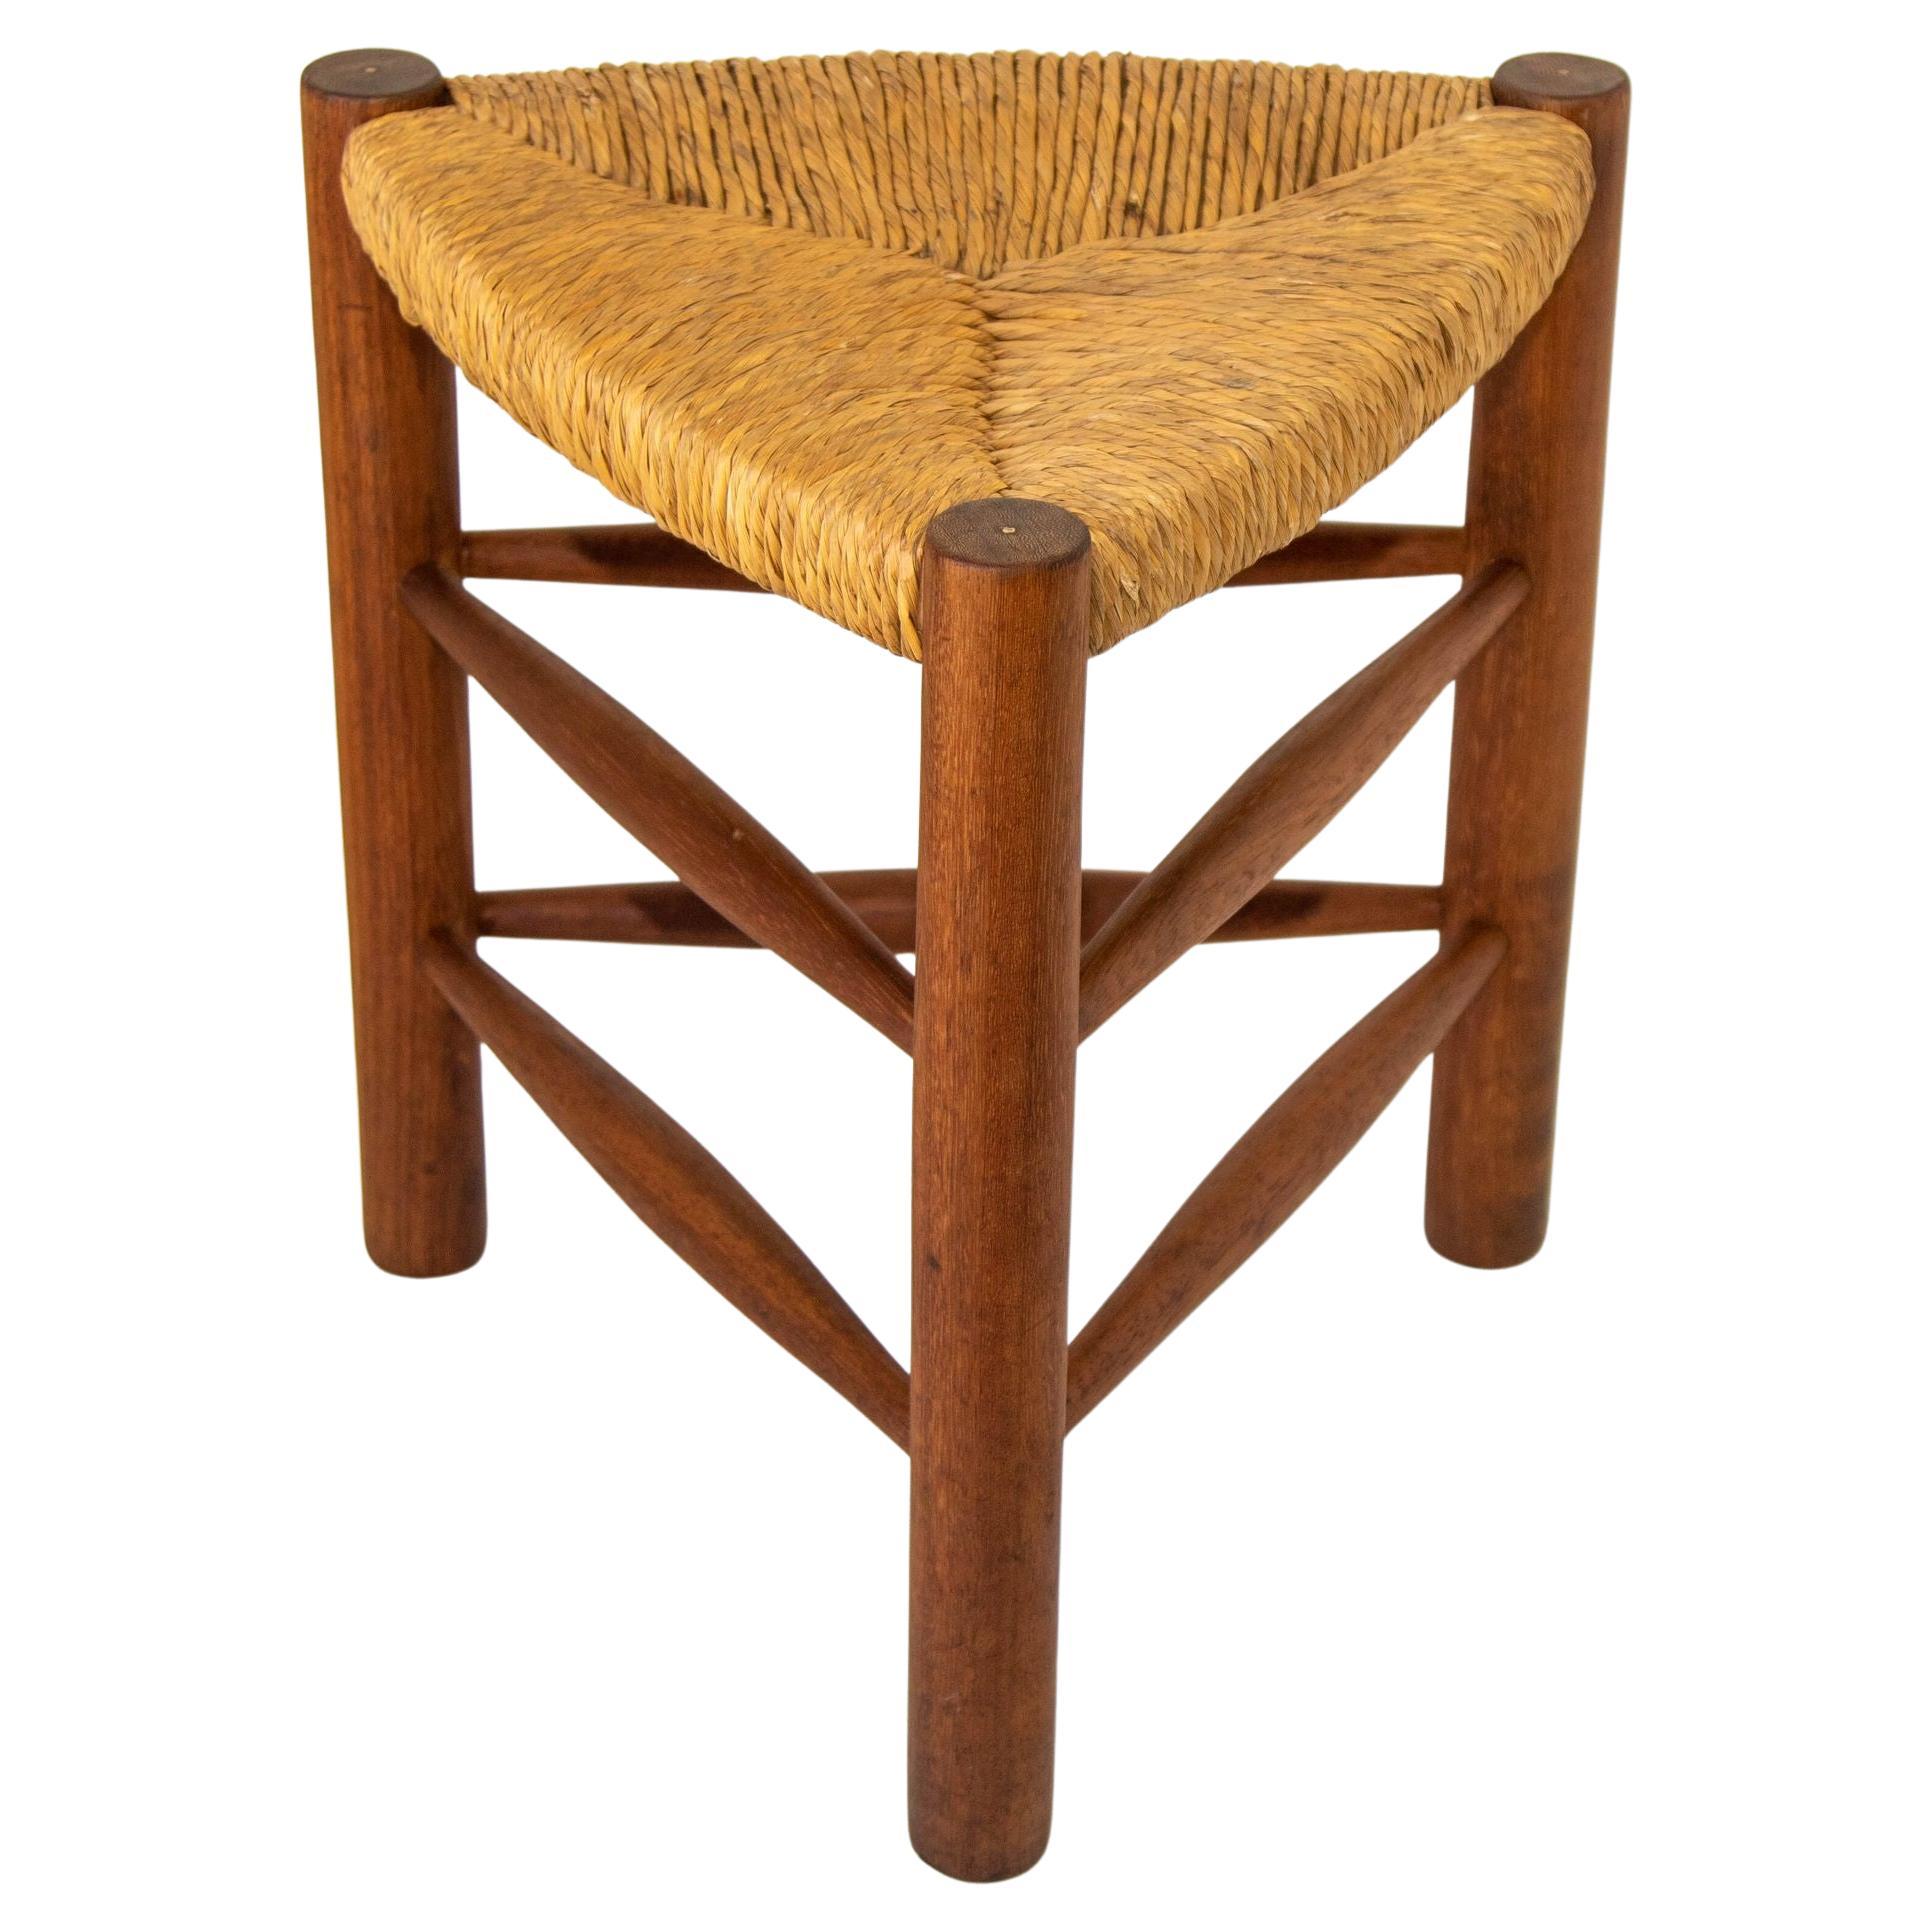 Vintage French Rush Woven Tripod Wooden Stool 1950 Charlotte Perriand Style For Sale